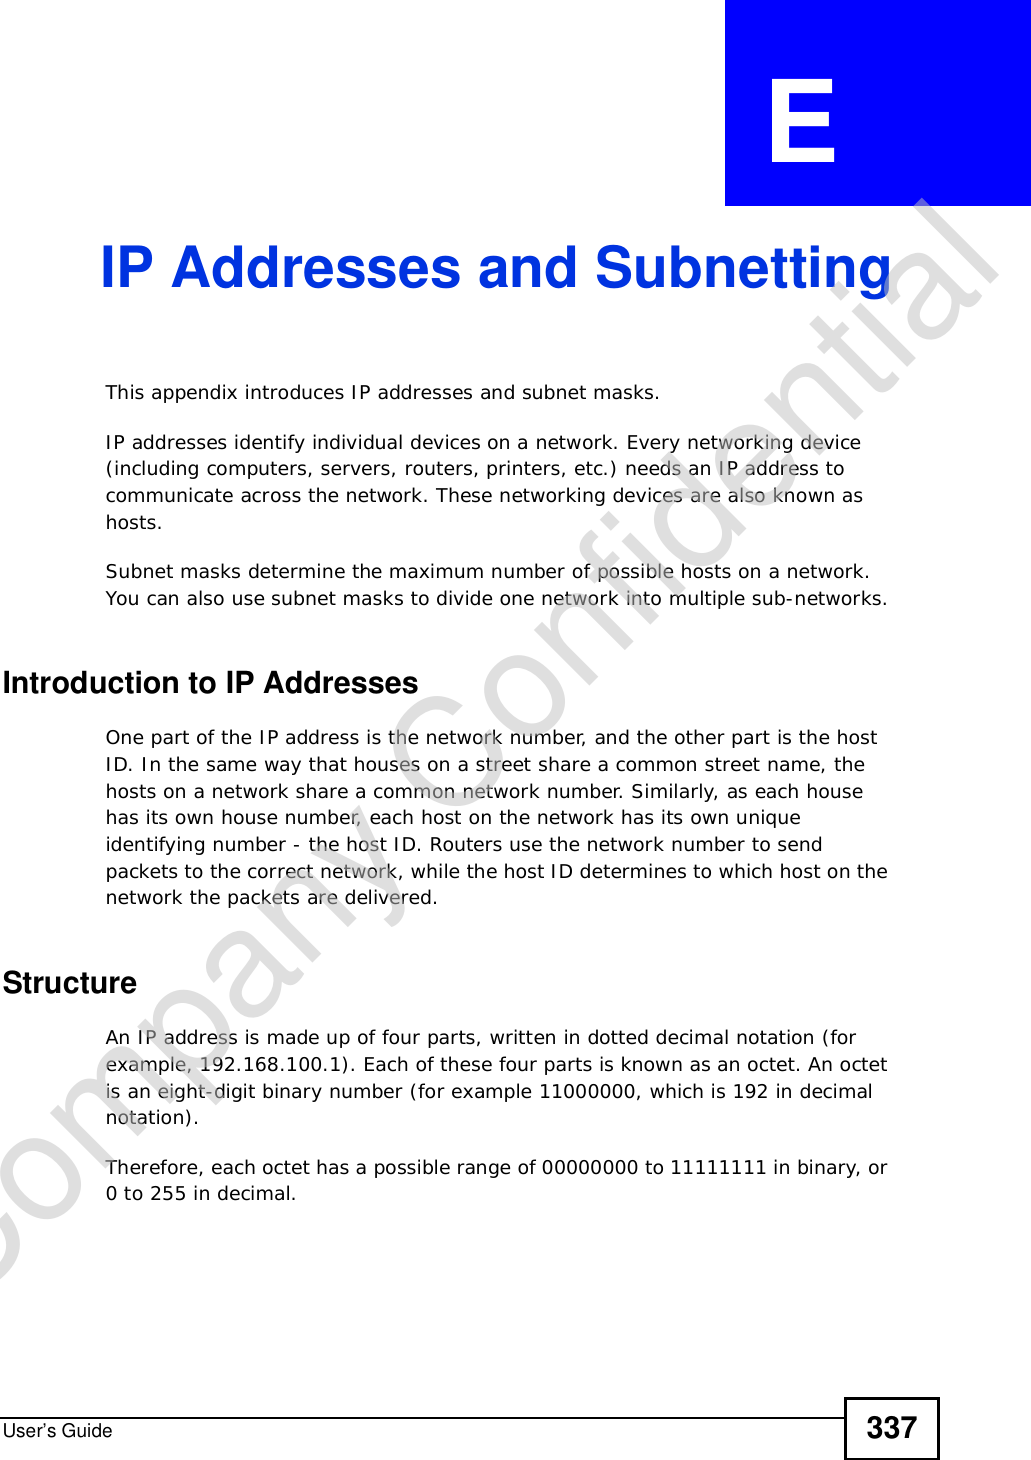 User’s Guide 337APPENDIX  E IP Addresses and SubnettingThis appendix introduces IP addresses and subnet masks. IP addresses identify individual devices on a network. Every networking device (including computers, servers, routers, printers, etc.) needs an IP address to communicate across the network. These networking devices are also known as hosts.Subnet masks determine the maximum number of possible hosts on a network. You can also use subnet masks to divide one network into multiple sub-networks.Introduction to IP AddressesOne part of the IP address is the network number, and the other part is the host ID. In the same way that houses on a street share a common street name, the hosts on a network share a common network number. Similarly, as each house has its own house number, each host on the network has its own unique identifying number - the host ID. Routers use the network number to send packets to the correct network, while the host ID determines to which host on the network the packets are delivered.StructureAn IP address is made up of four parts, written in dotted decimal notation (for example, 192.168.100.1). Each of these four parts is known as an octet. An octet is an eight-digit binary number (for example 11000000, which is 192 in decimal notation). Therefore, each octet has a possible range of 00000000 to 11111111 in binary, or 0 to 255 in decimal.Company Confidential